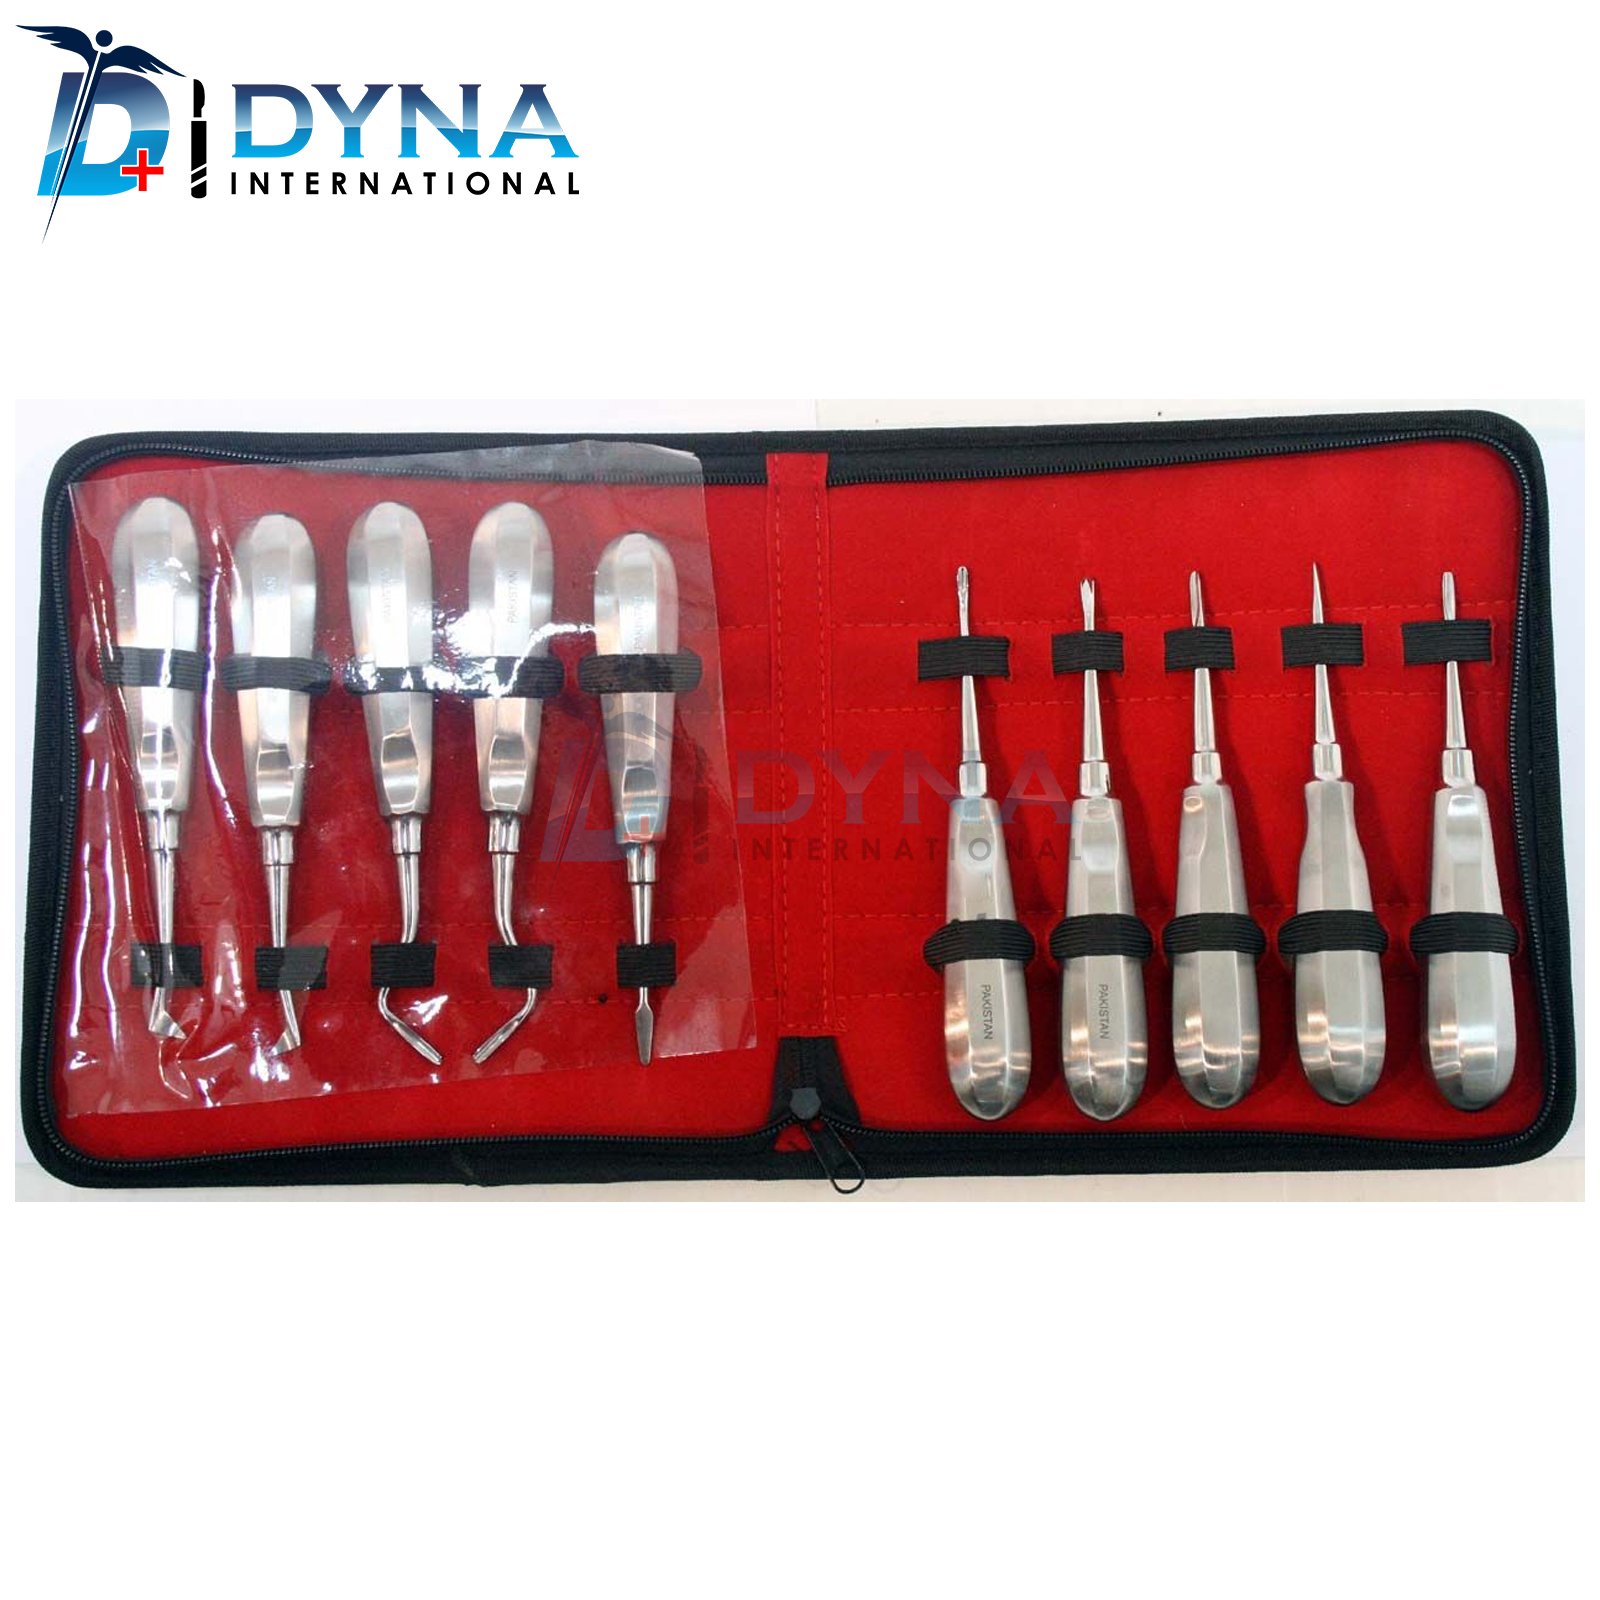 10-Pcs-Dental-Tooth-Surgery-Elevators-Sets-with-Pouch-Good-Quality-1.jpg